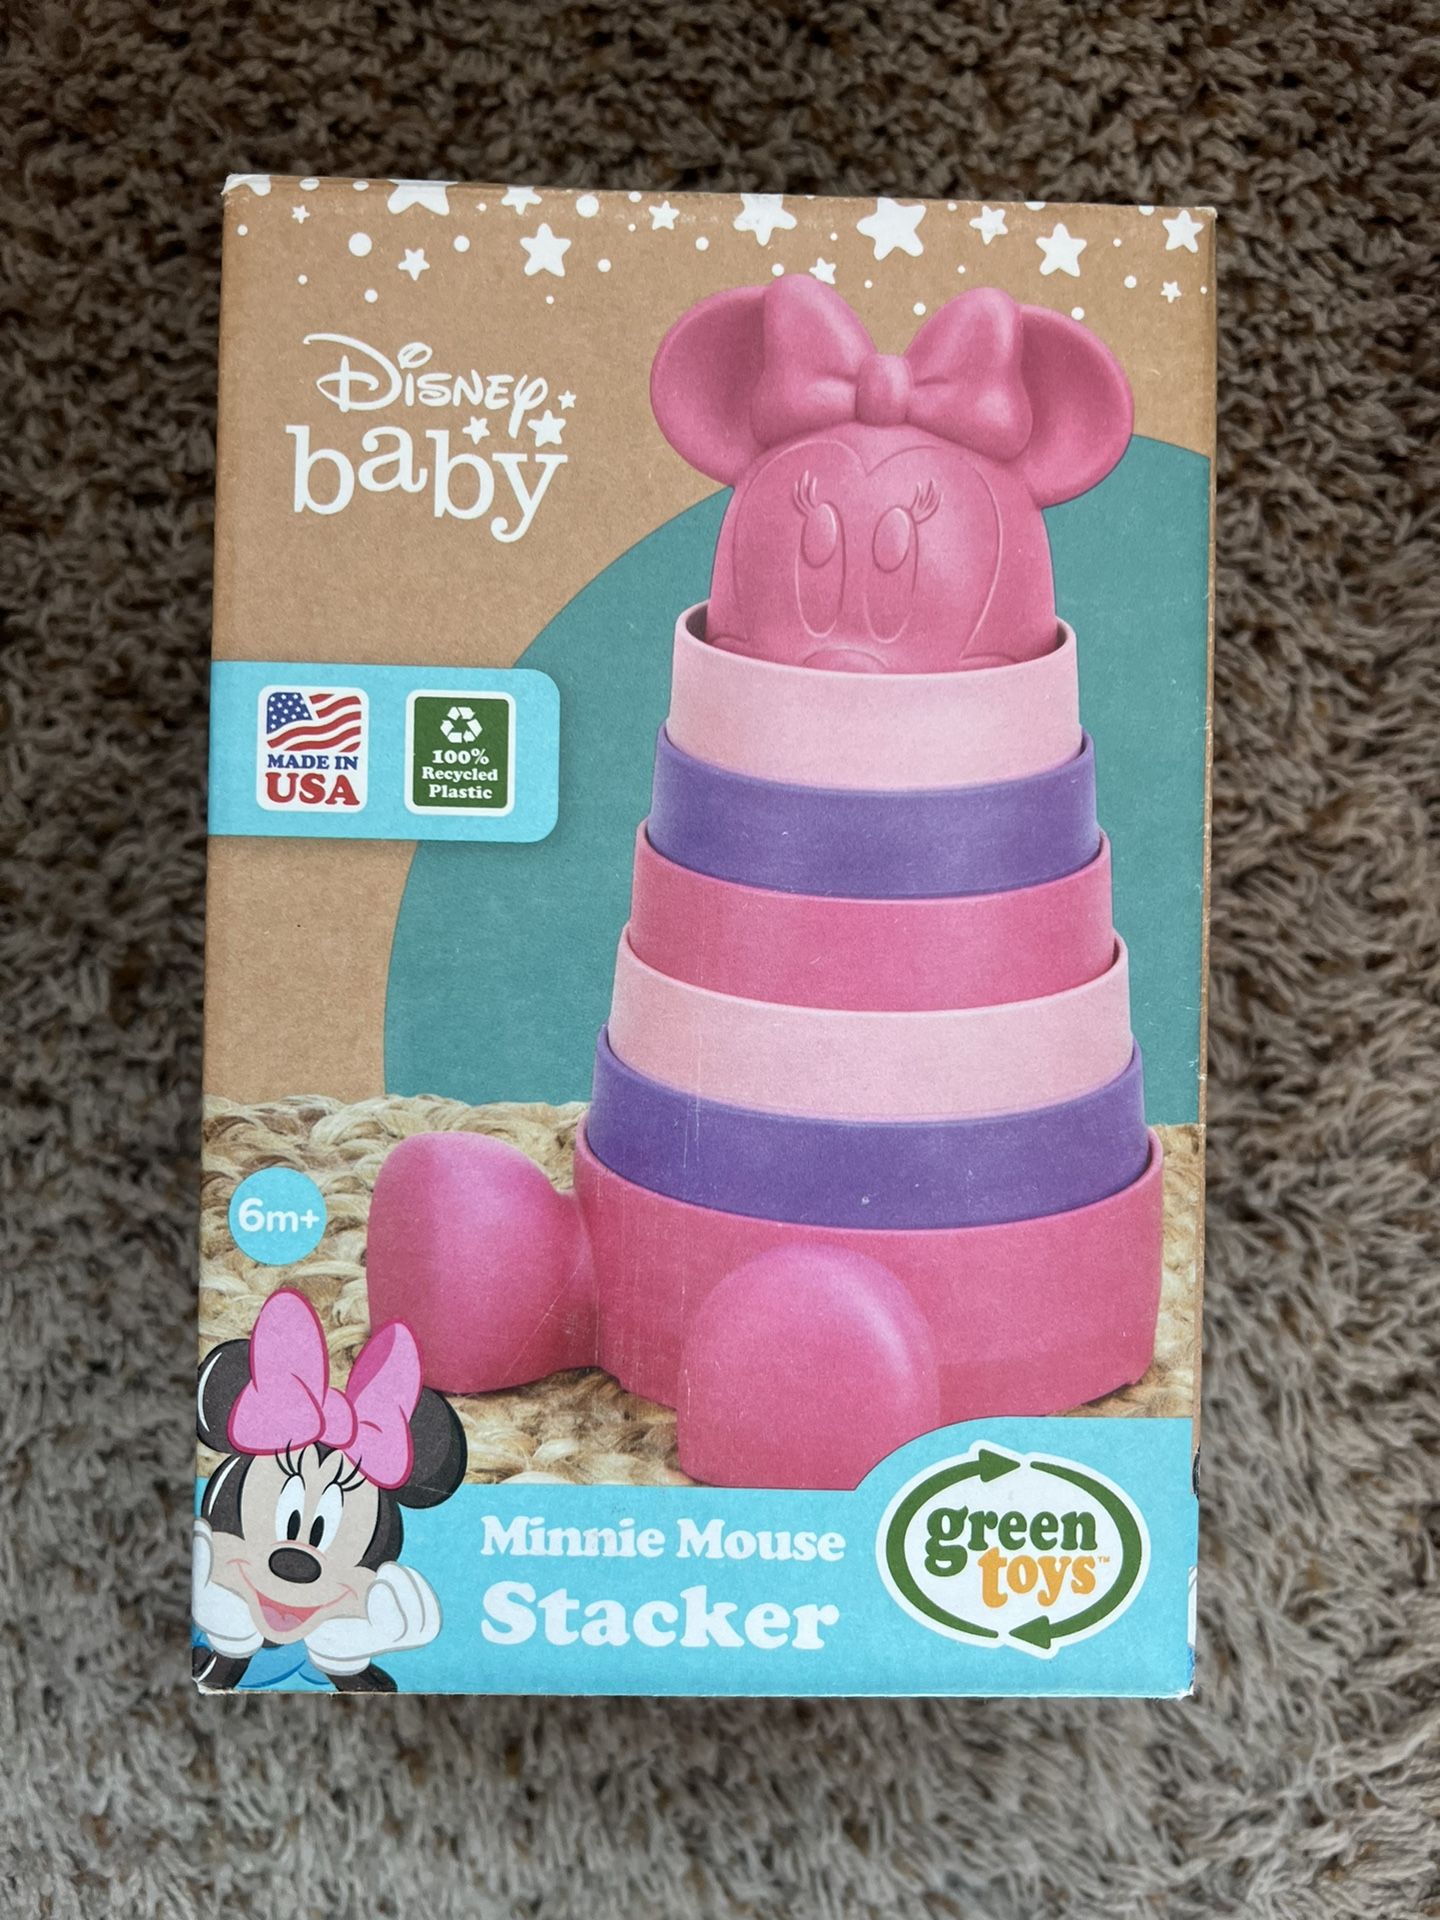 Disney Baby Minute Mouse Stacker Toy 